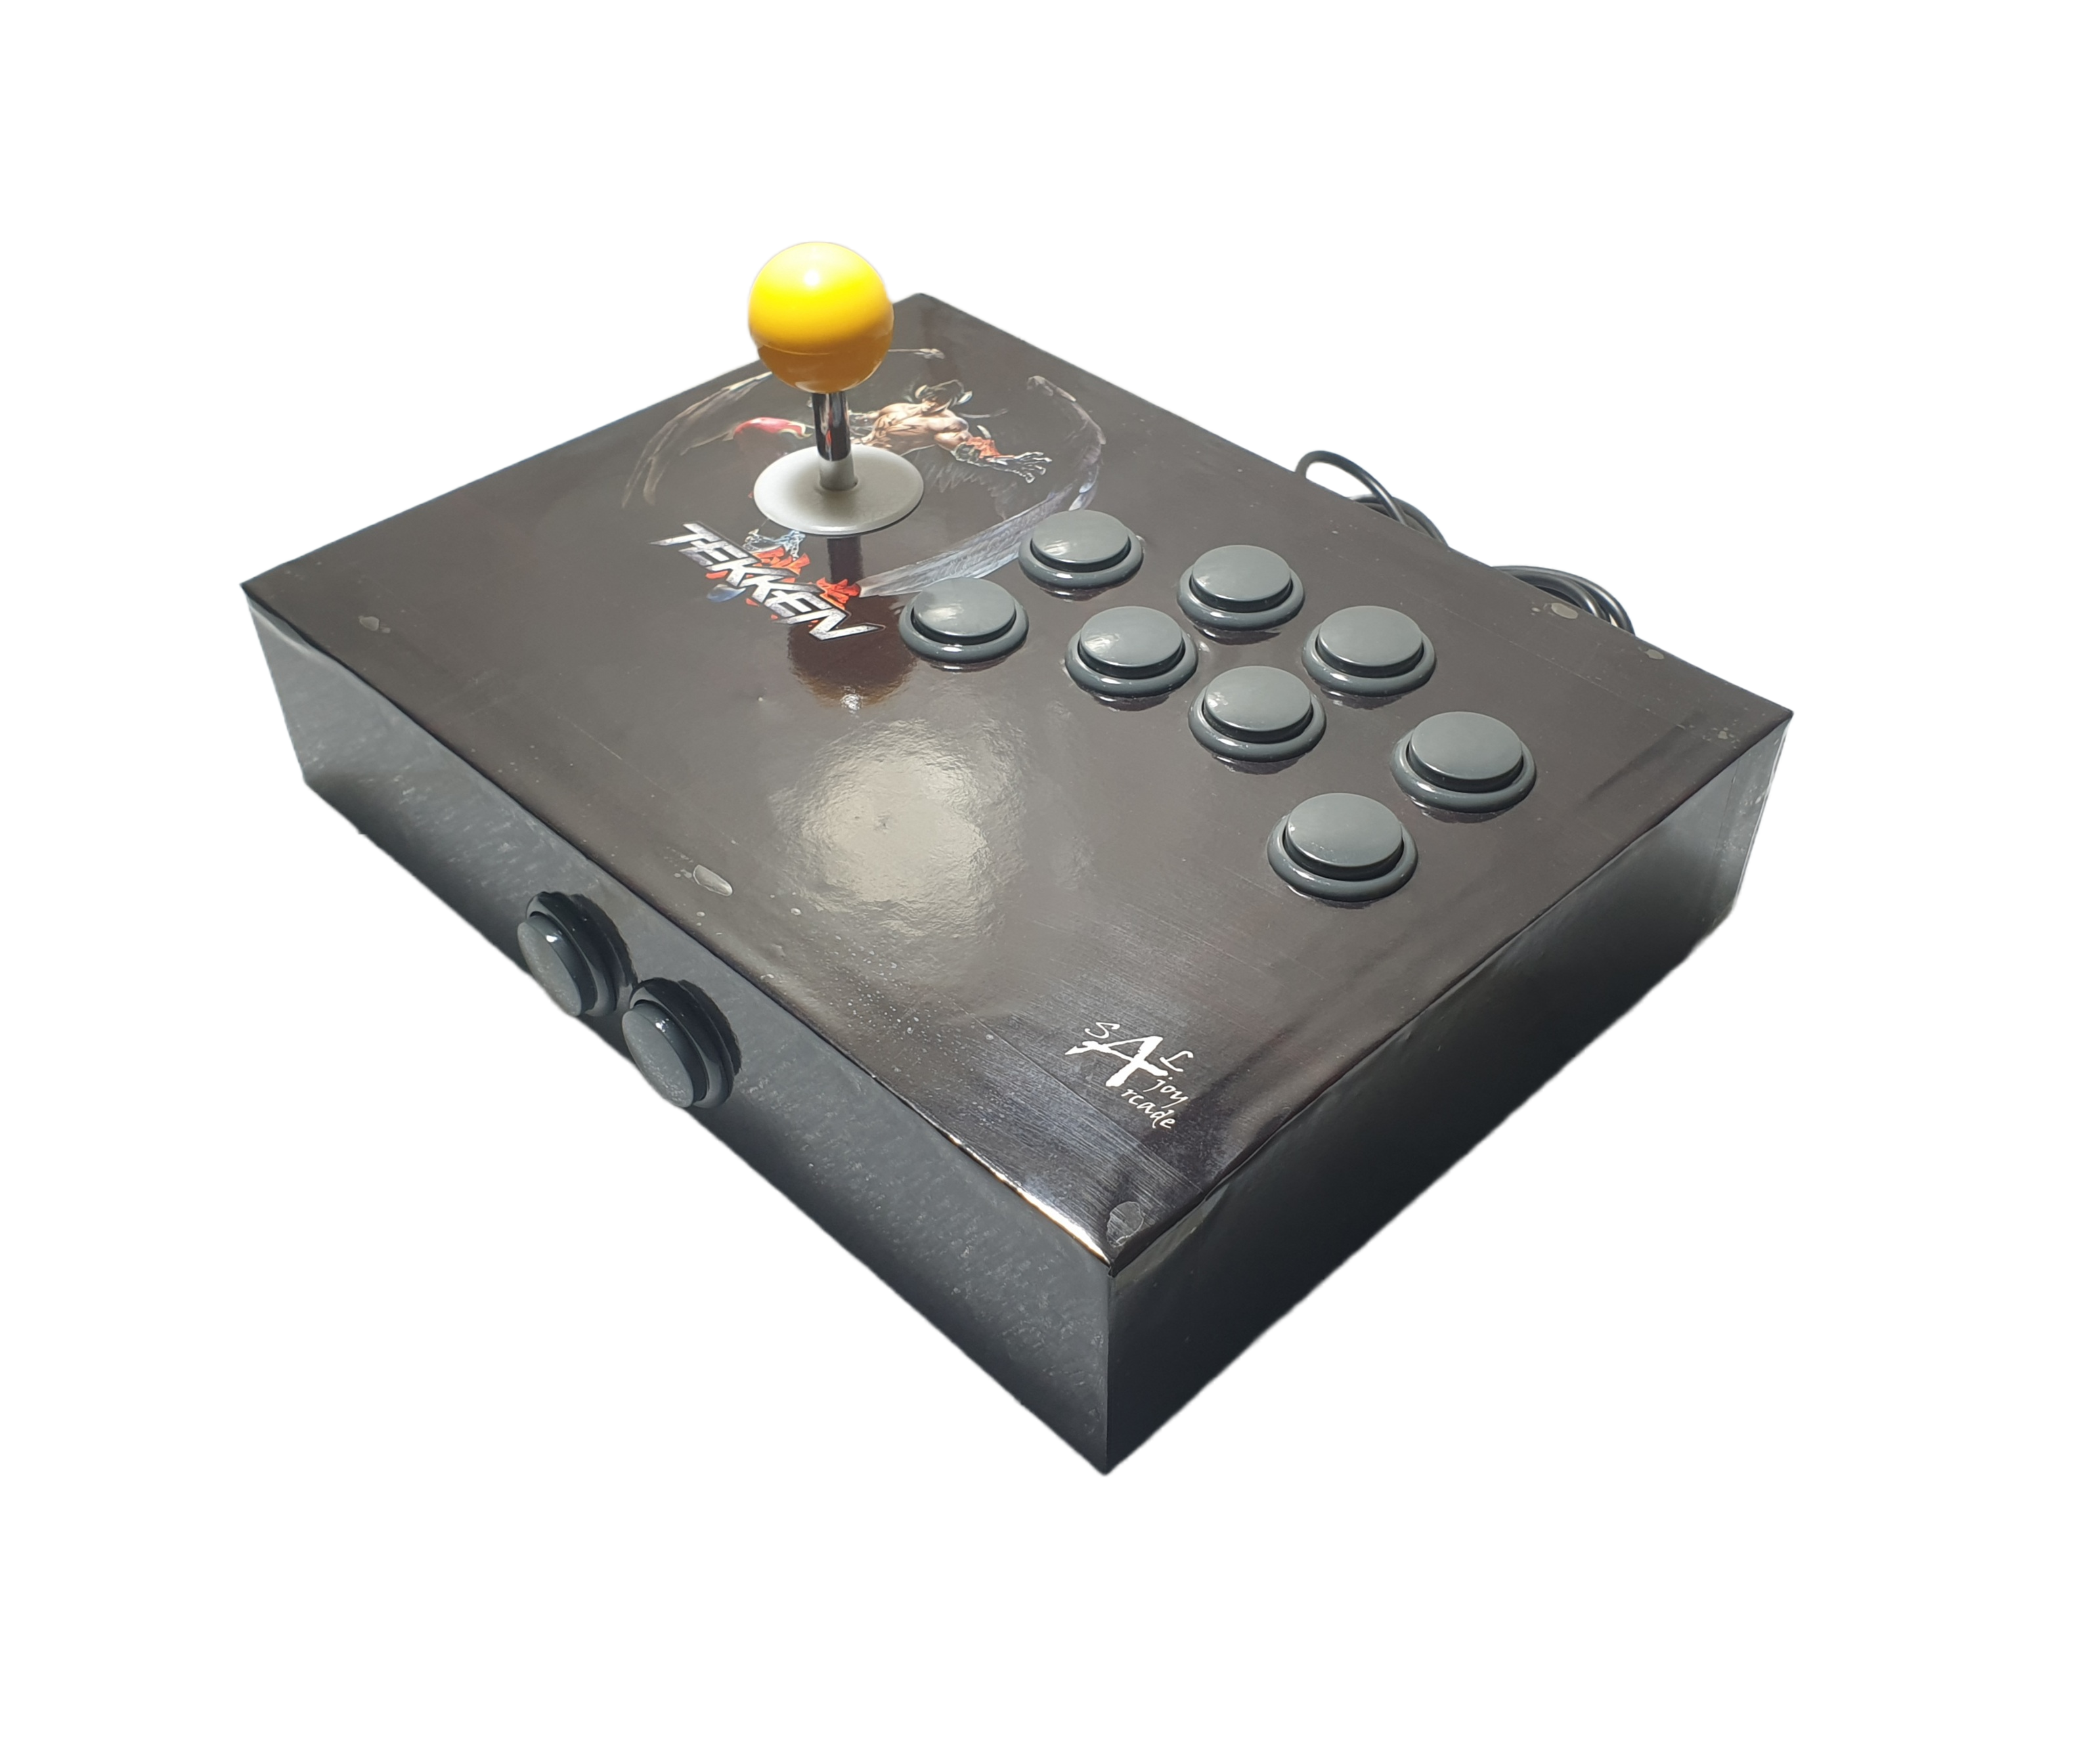 SANWA COPY PC Usb Arcade joystick Gamepad for Play station 3, Windows and Android [Model: YSTP3]